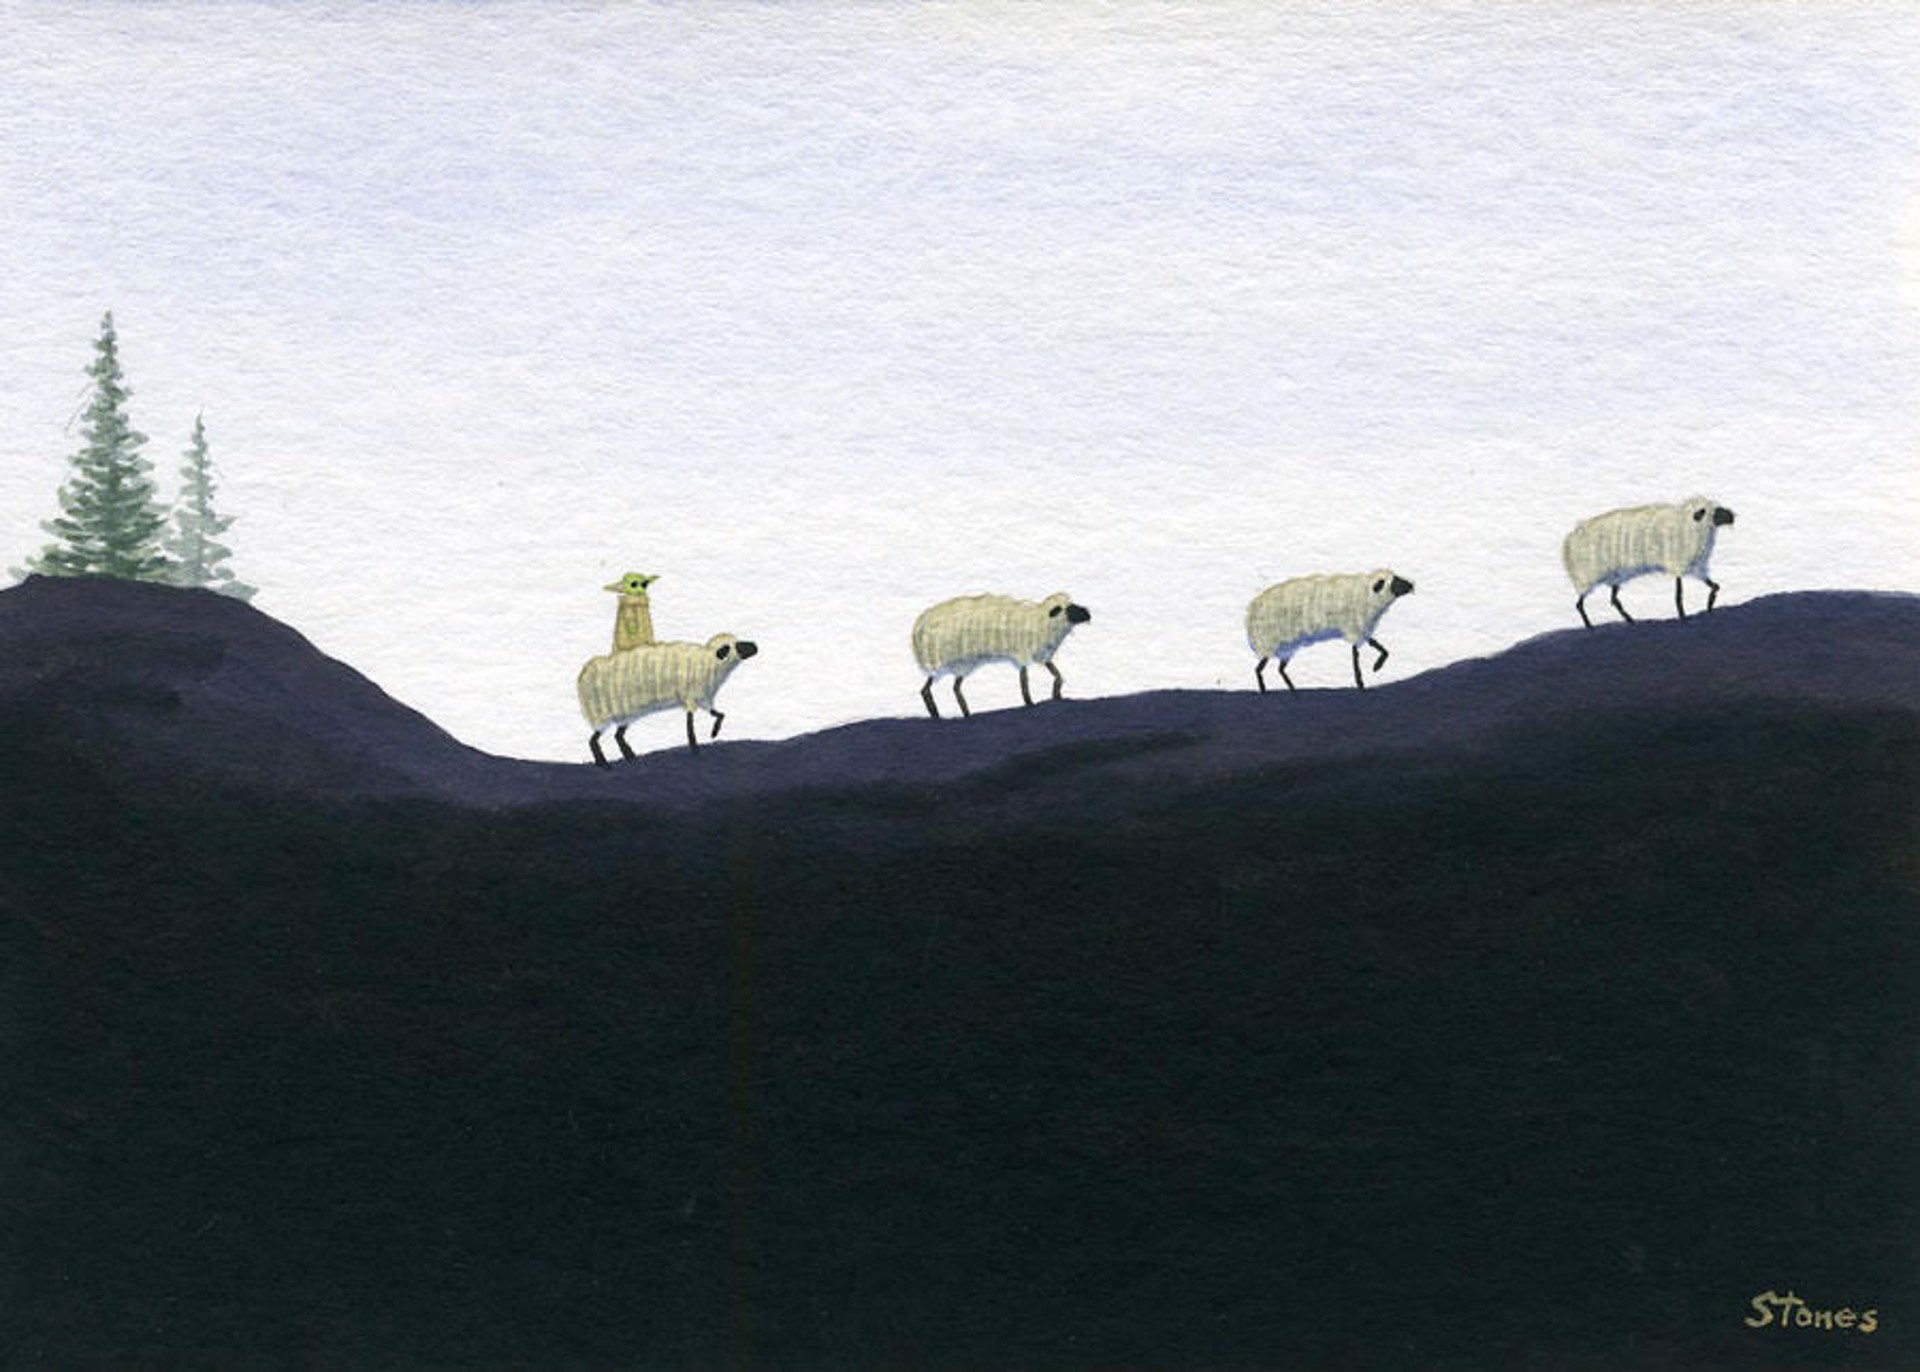 Four Sheep, One Child by Greg Stones